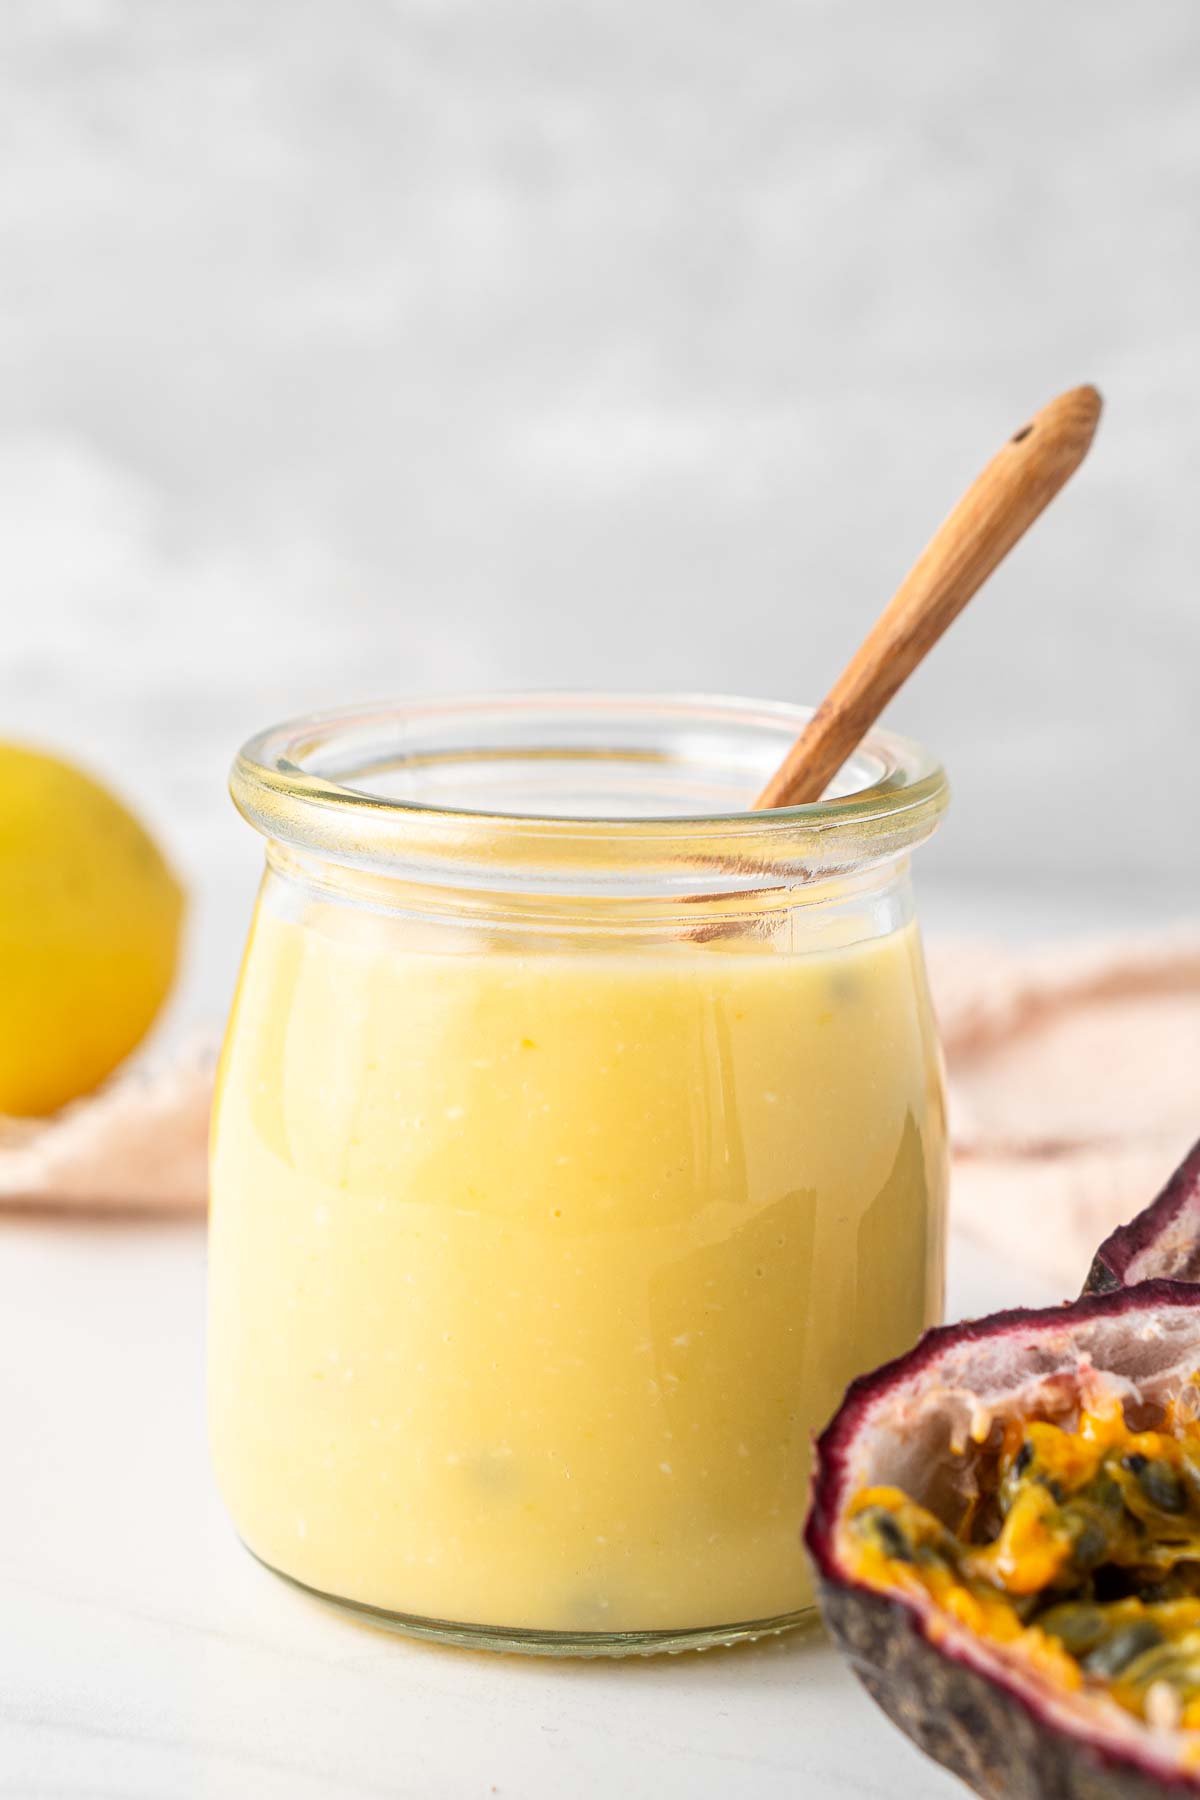 Dairy free passionfruit and lemon curd in a jar with a spoon.